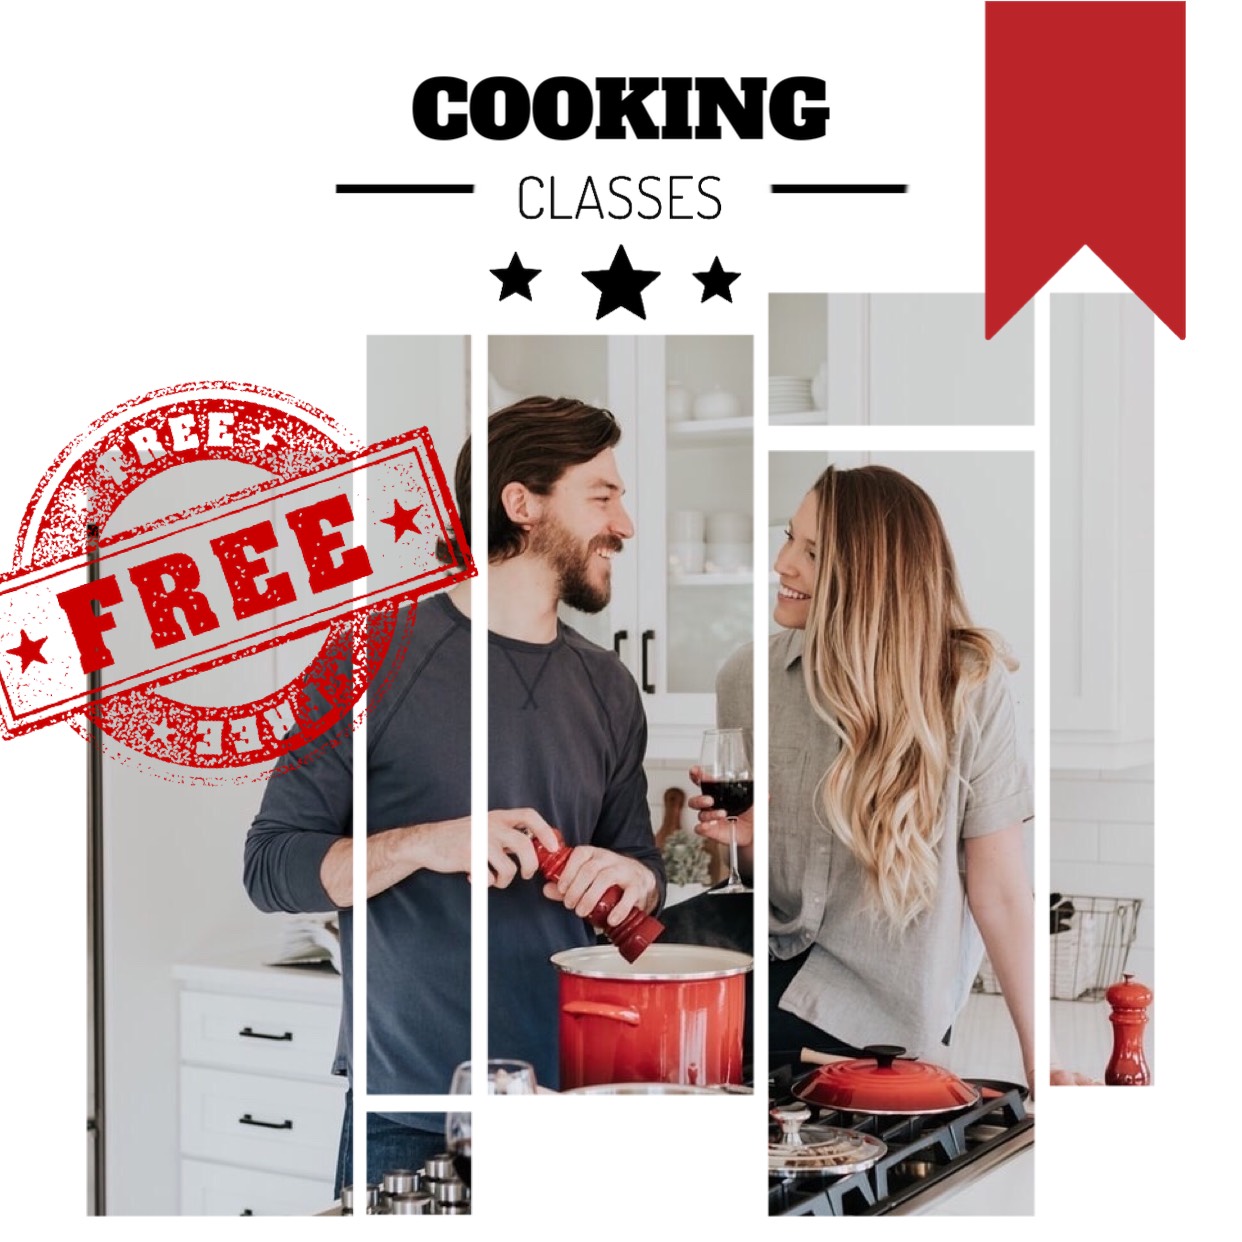 Man and woman cooking classes Facebook post template